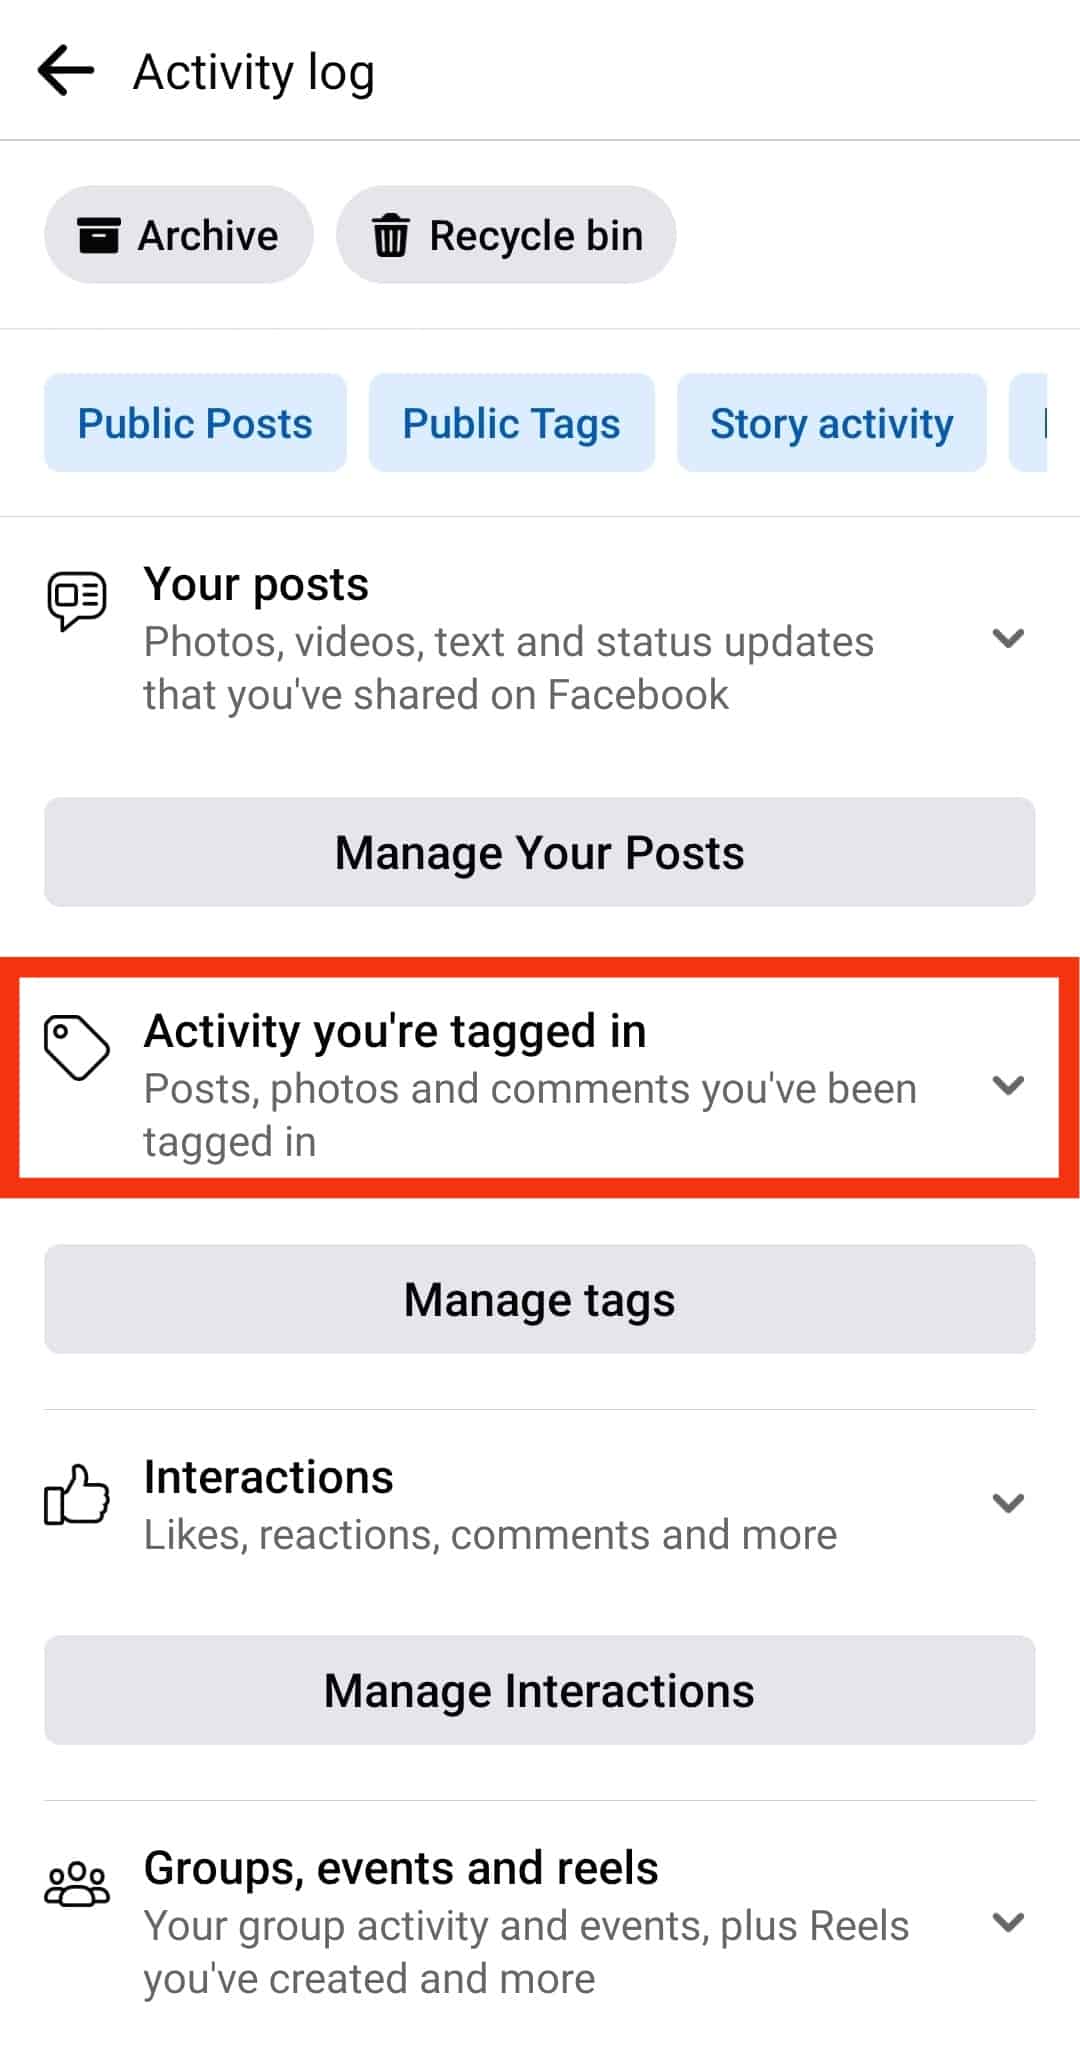 Click On The Activity You're Tagged In Option